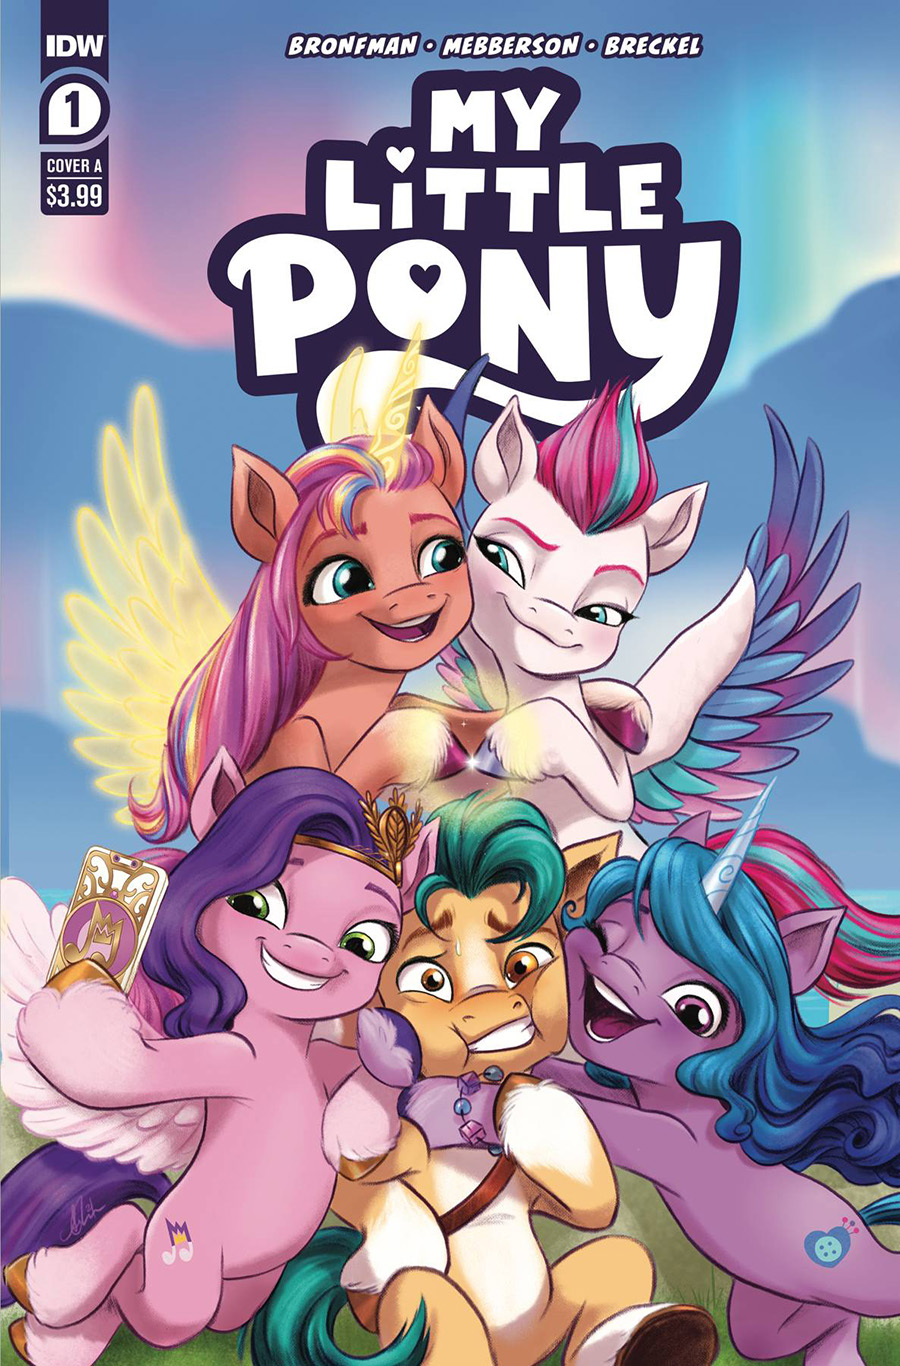 My Little Pony #1 Cover A Regular Amy Mebberson Cover